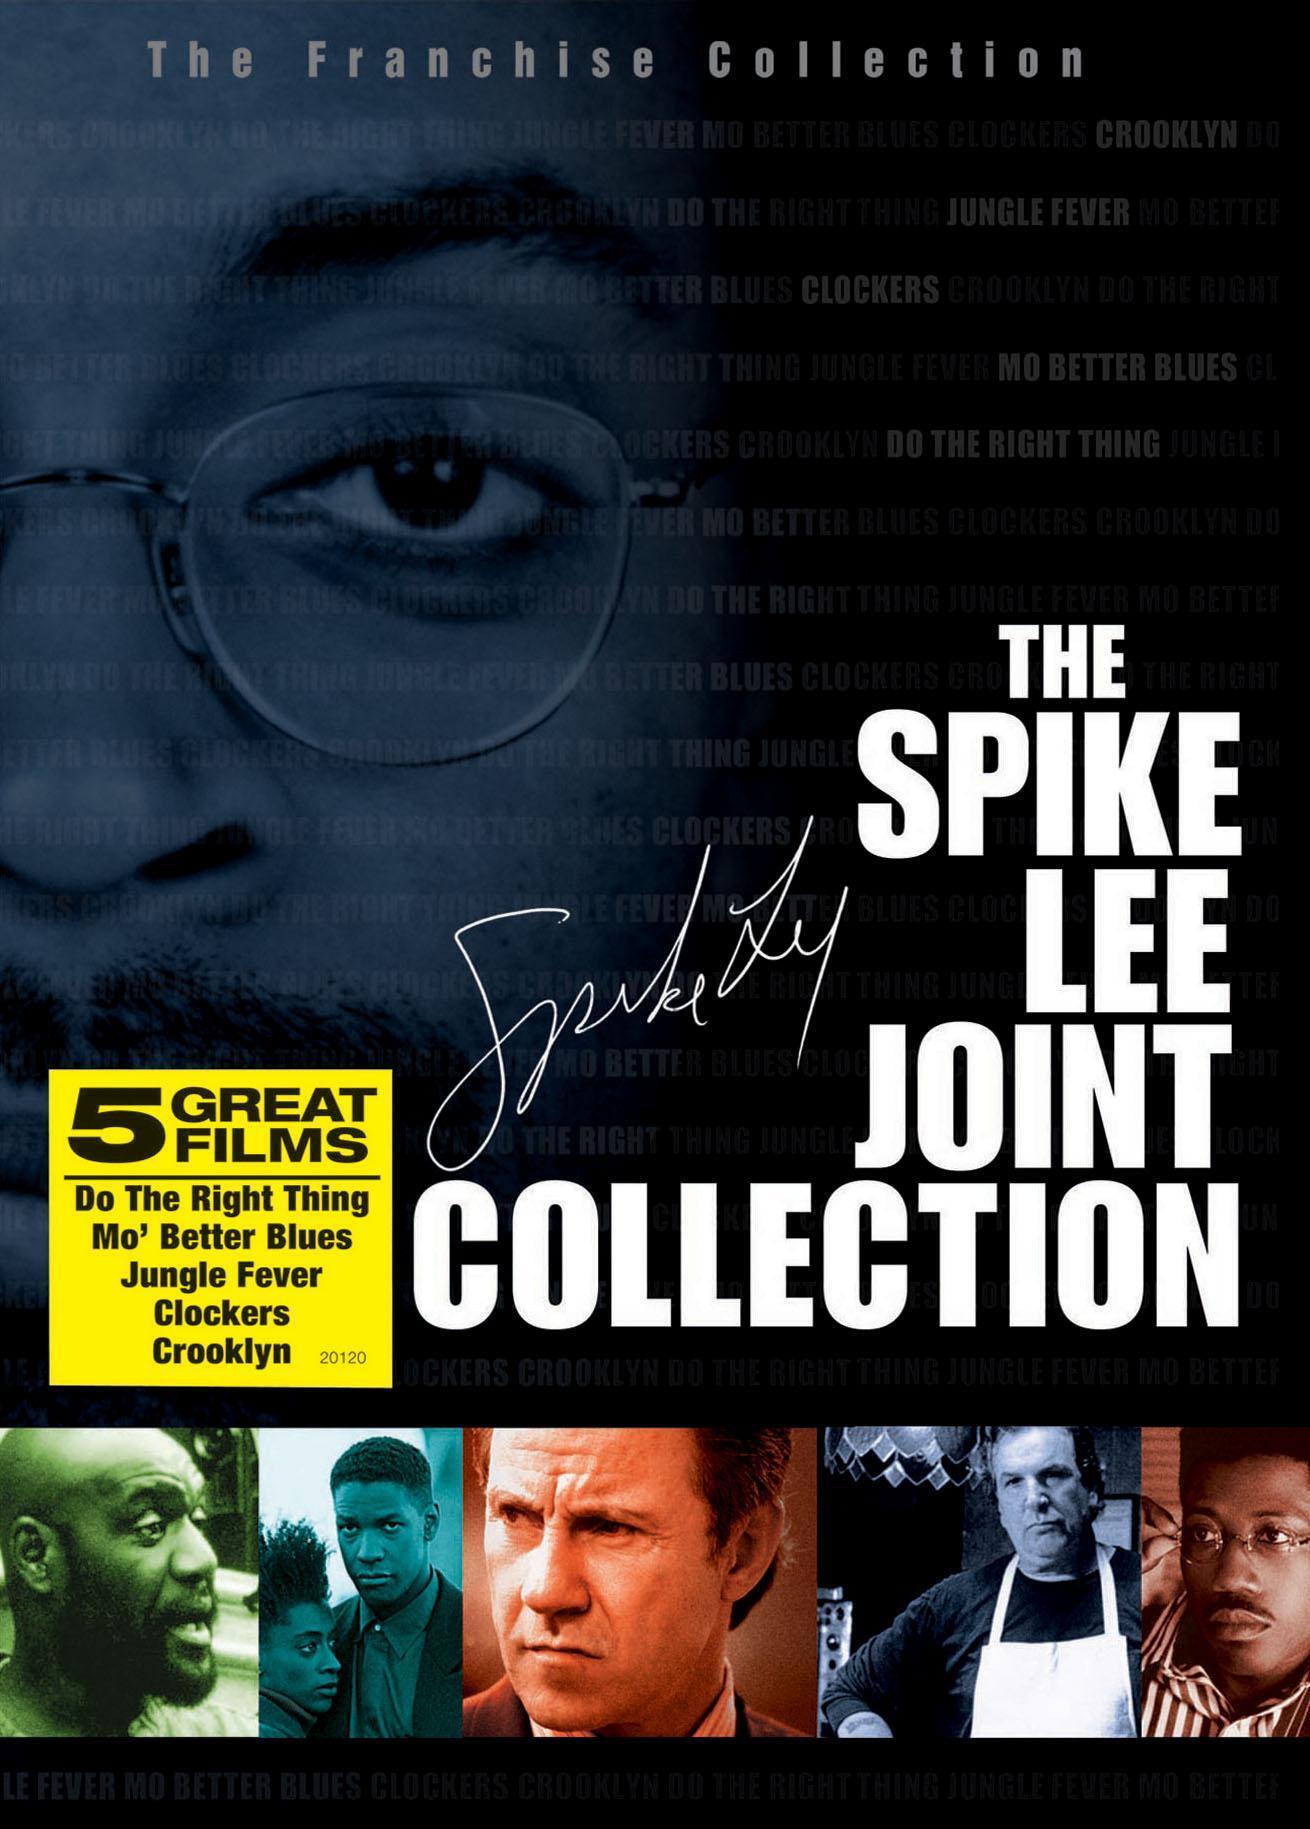 The Spike Lee Joint Collection (DVD Franchise Collection) - DVD   - Sci Fi Movies On DVD - Movies On GRUV